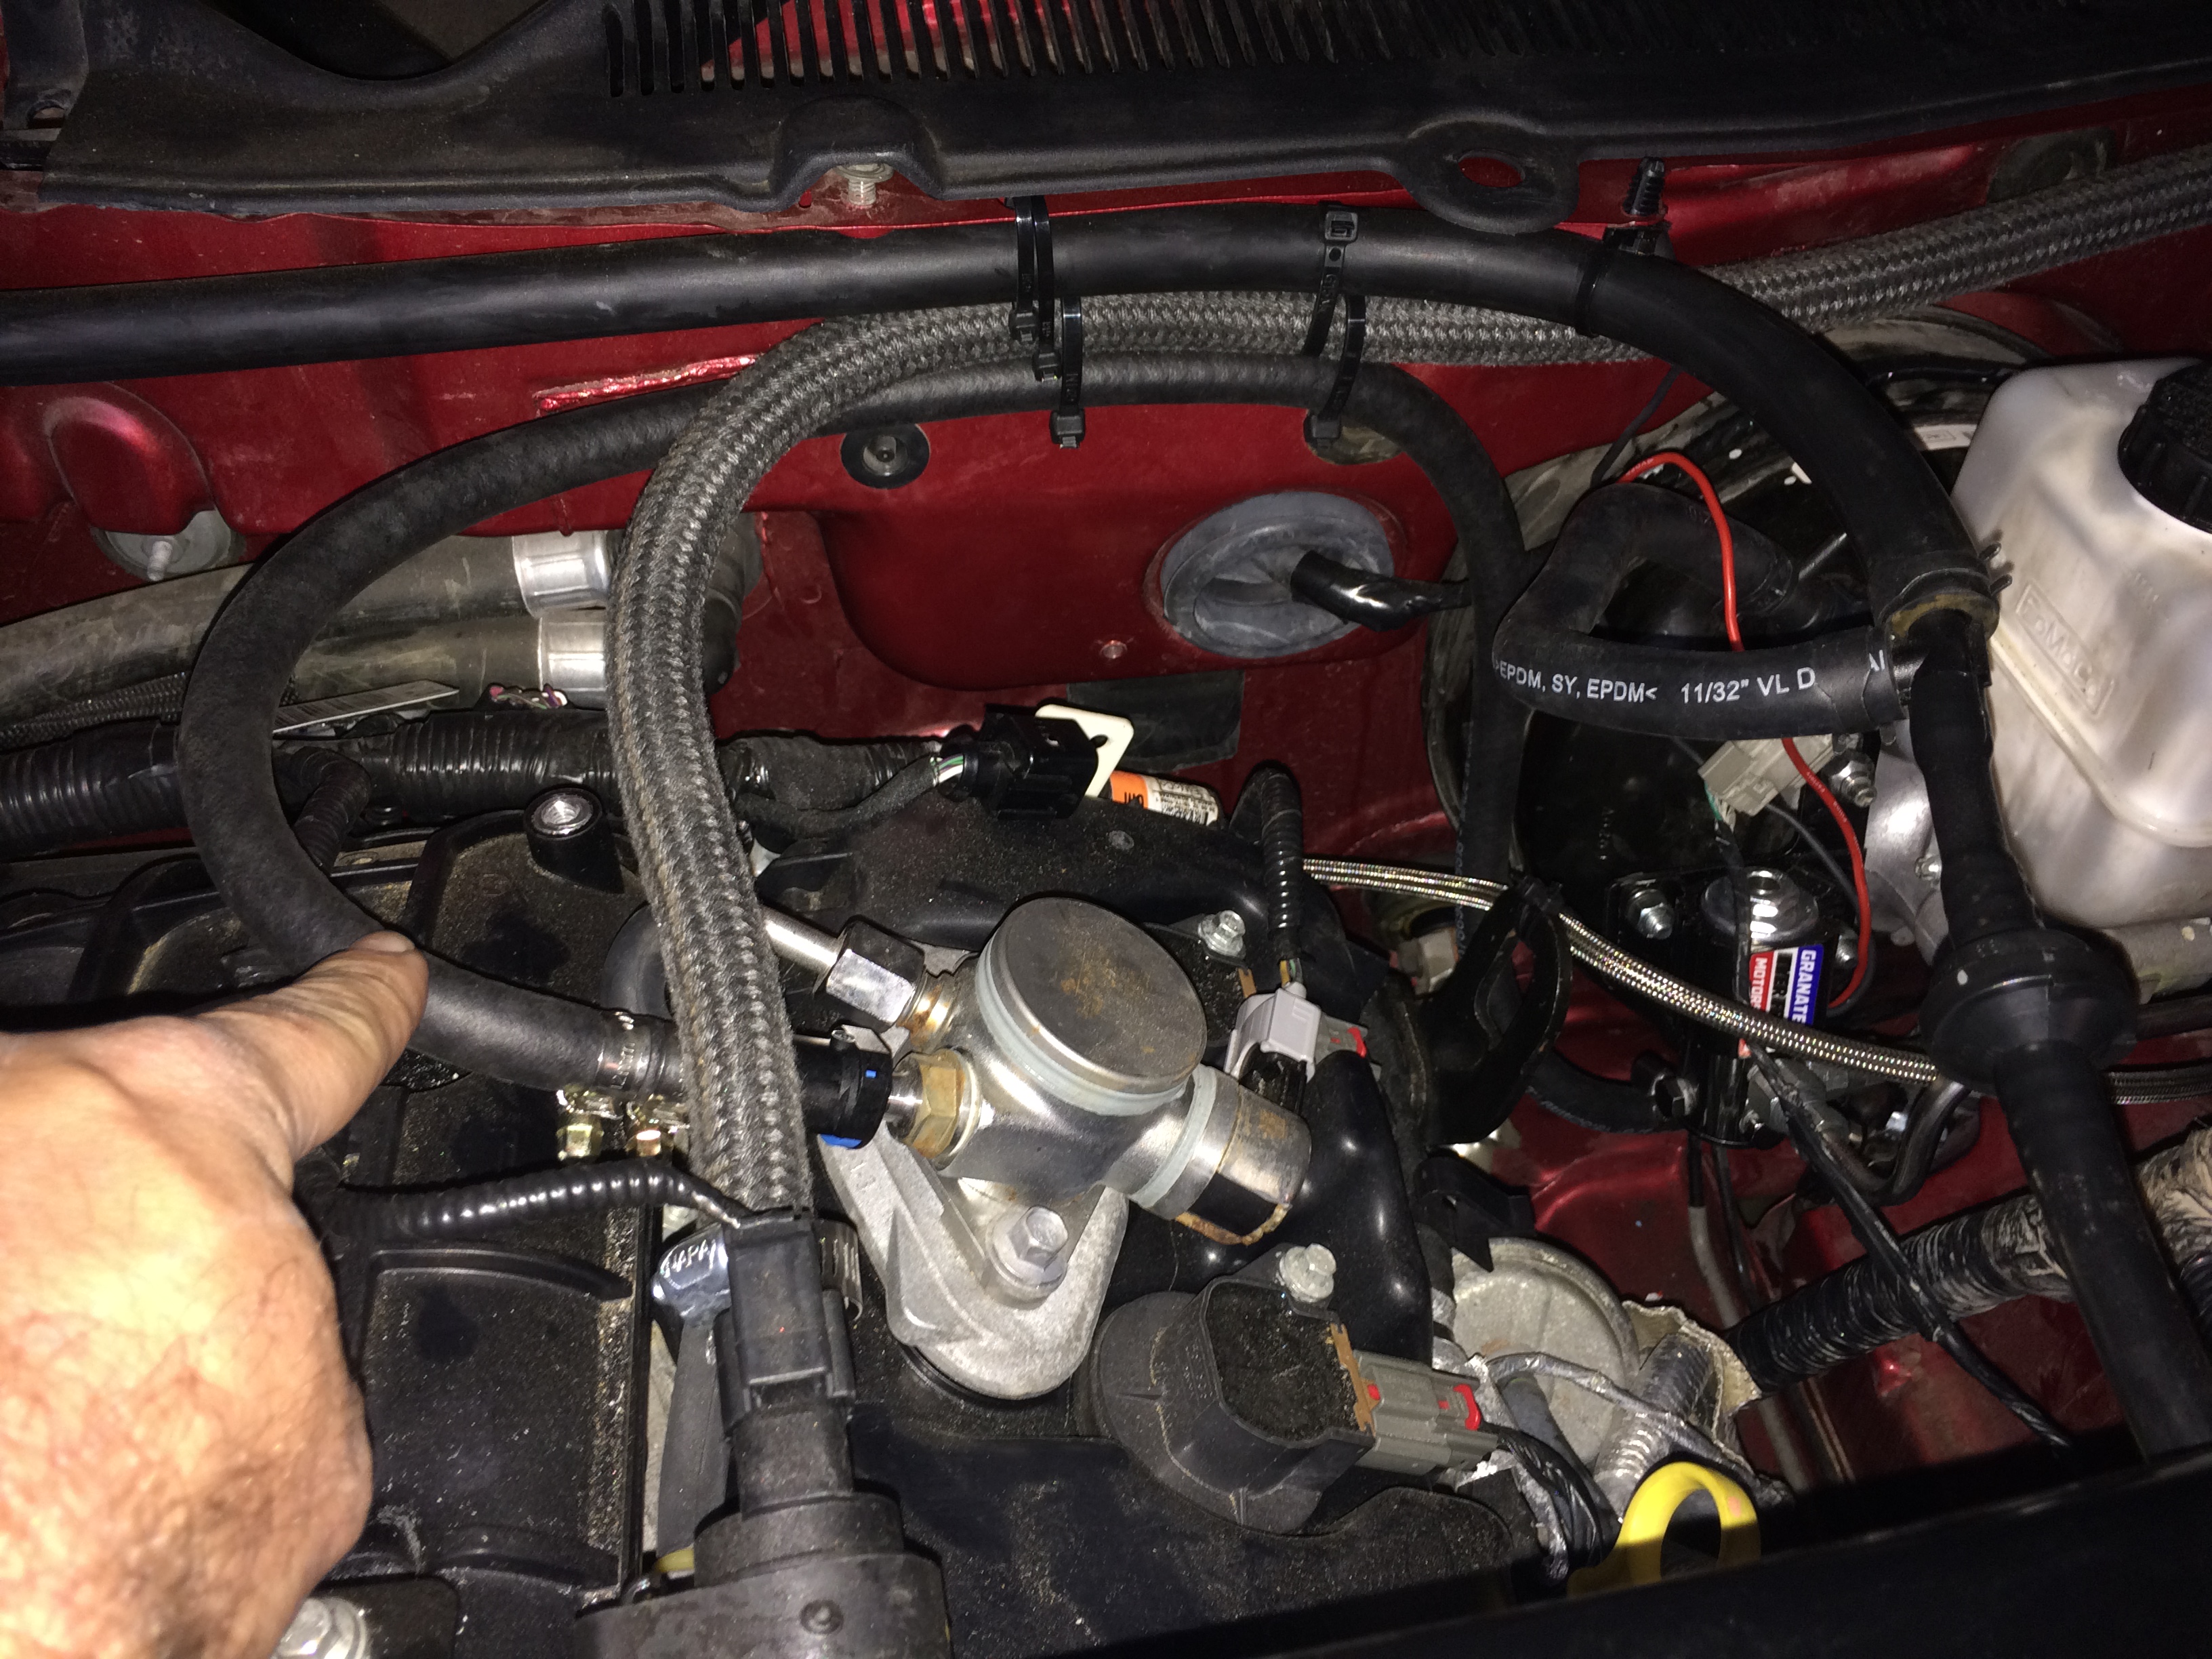 Mustang 3.5L Ecoboost engine swap - Page 22 - The Mustang Source - Ford